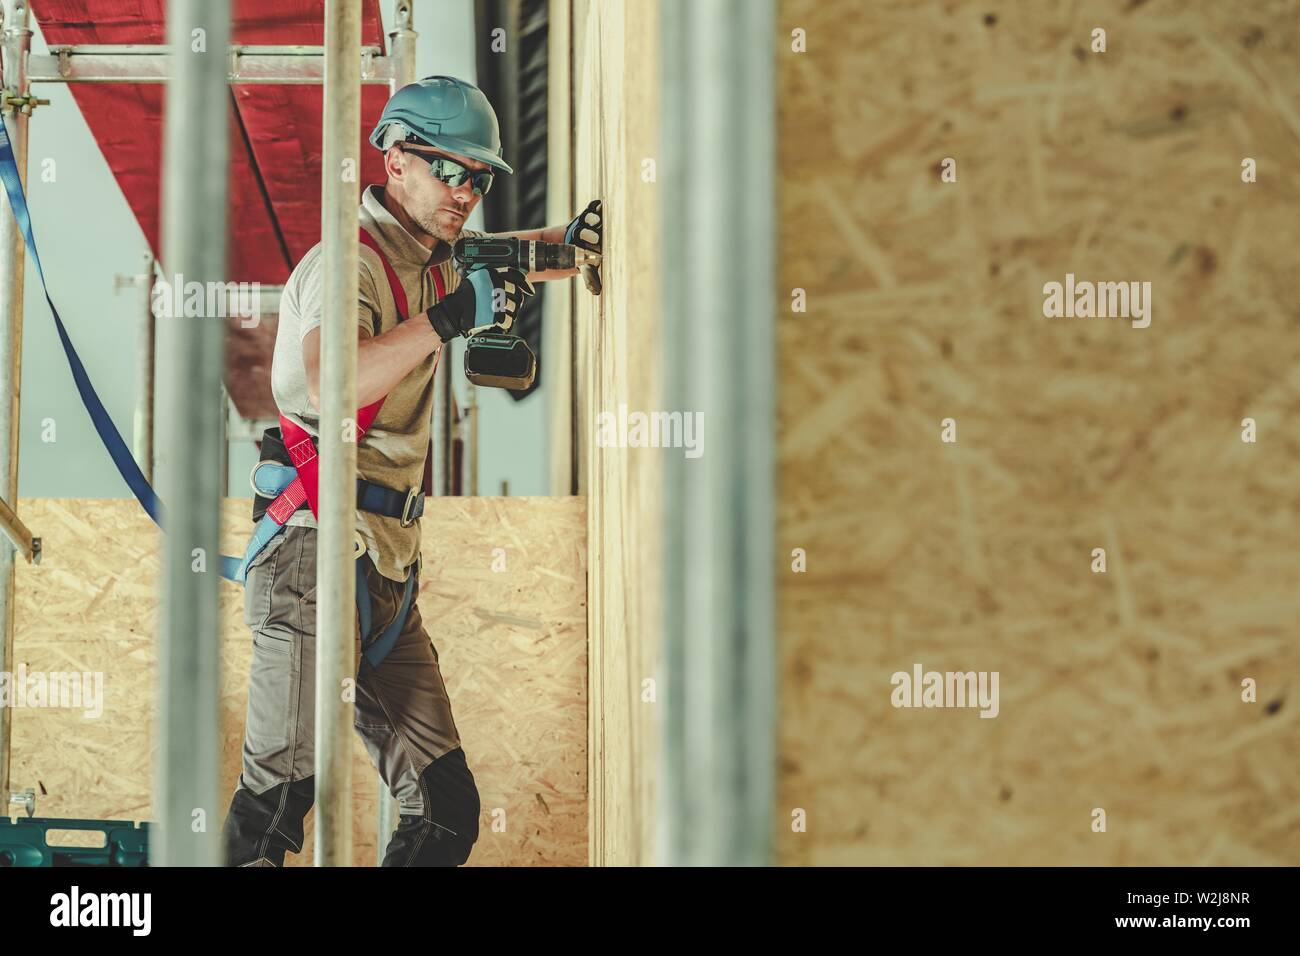 Construction Day Job. Caucasian Worker on a Scaffolding During Working Hours. Labor Theme. Stock Photo